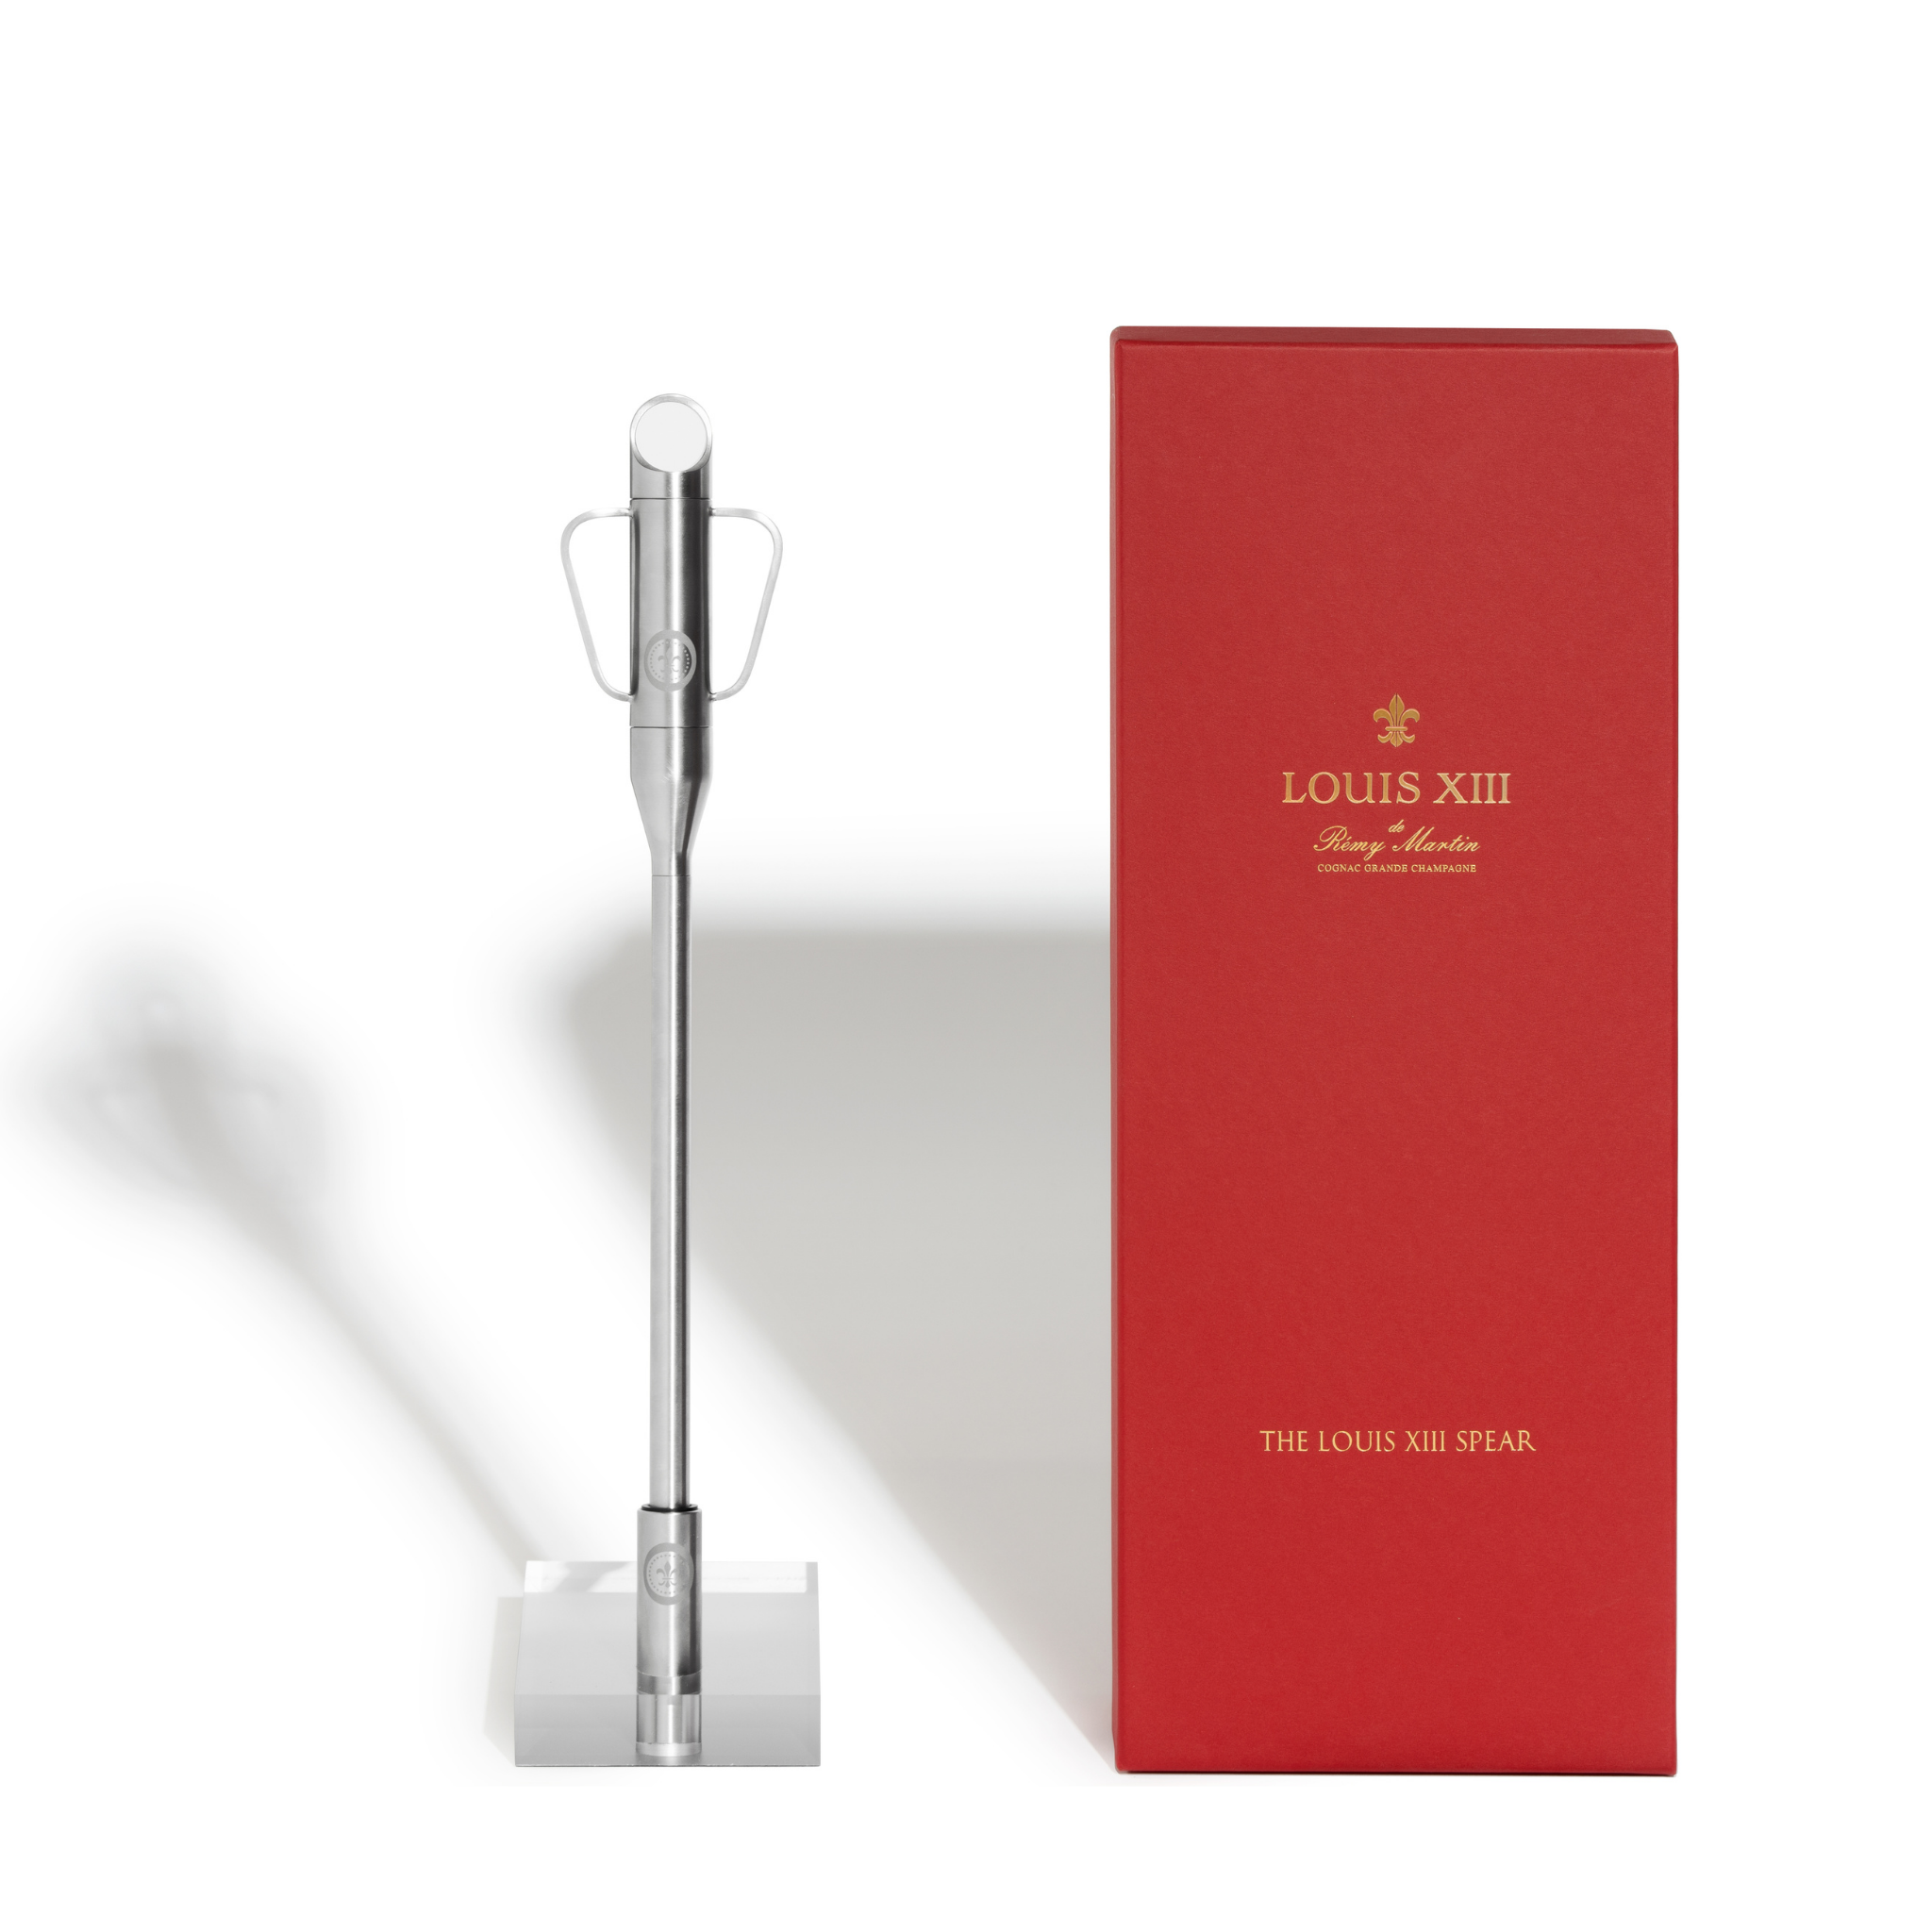 A packshot of a spear for Magnum decanter with its holder, close to its red packaging